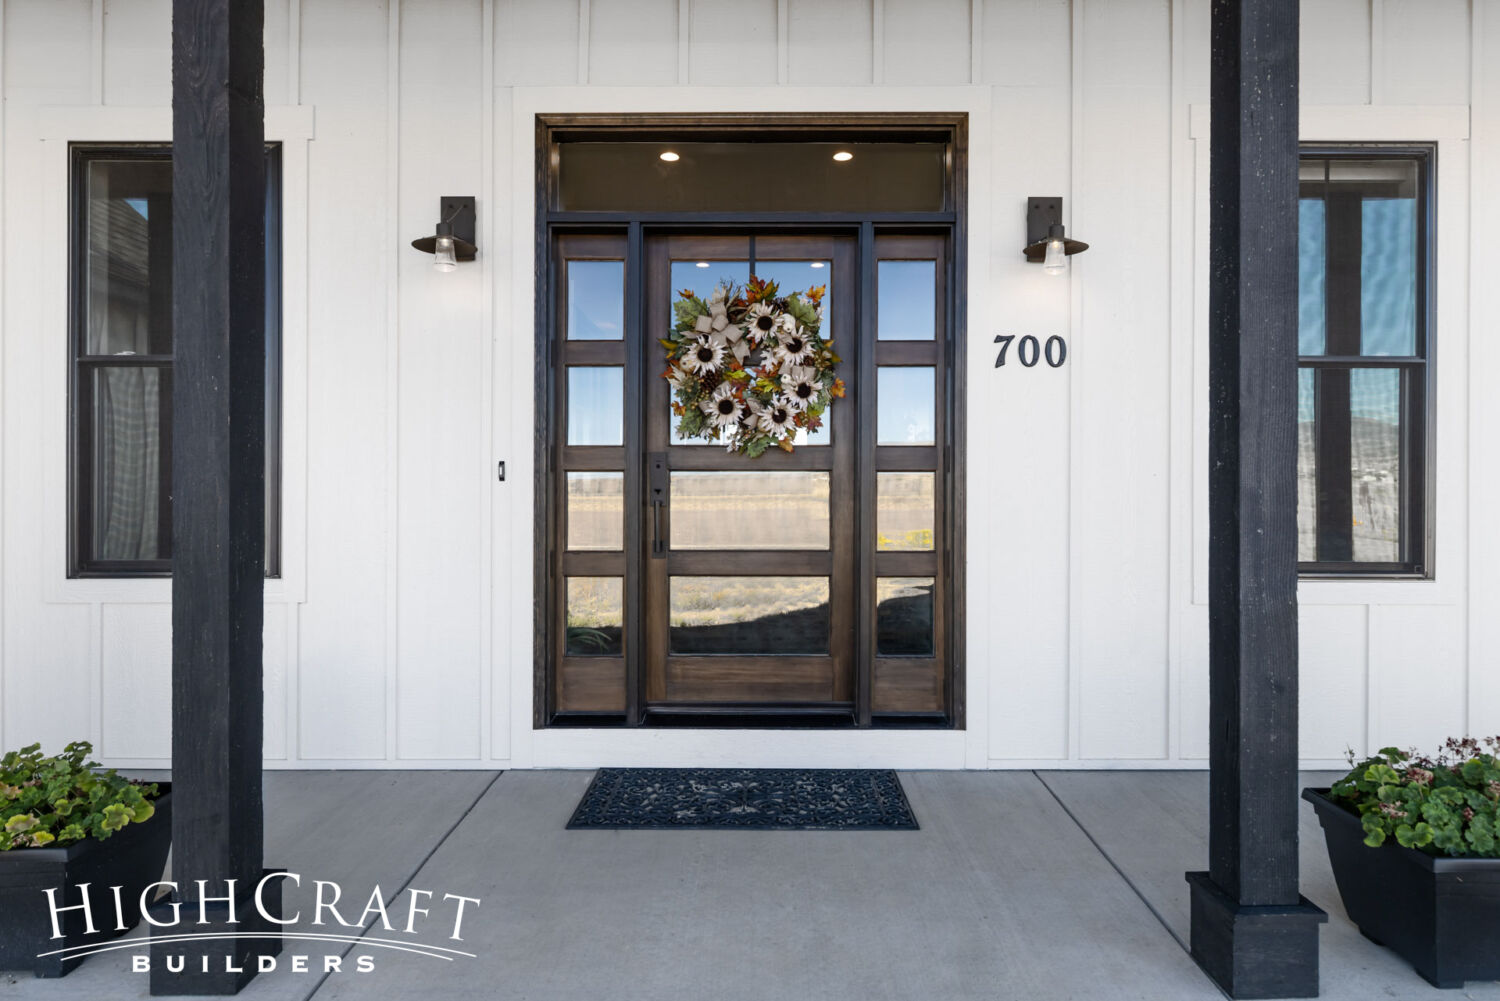 Modern-Farmhouse-With-Shop-Front-Glass-Entry-Door